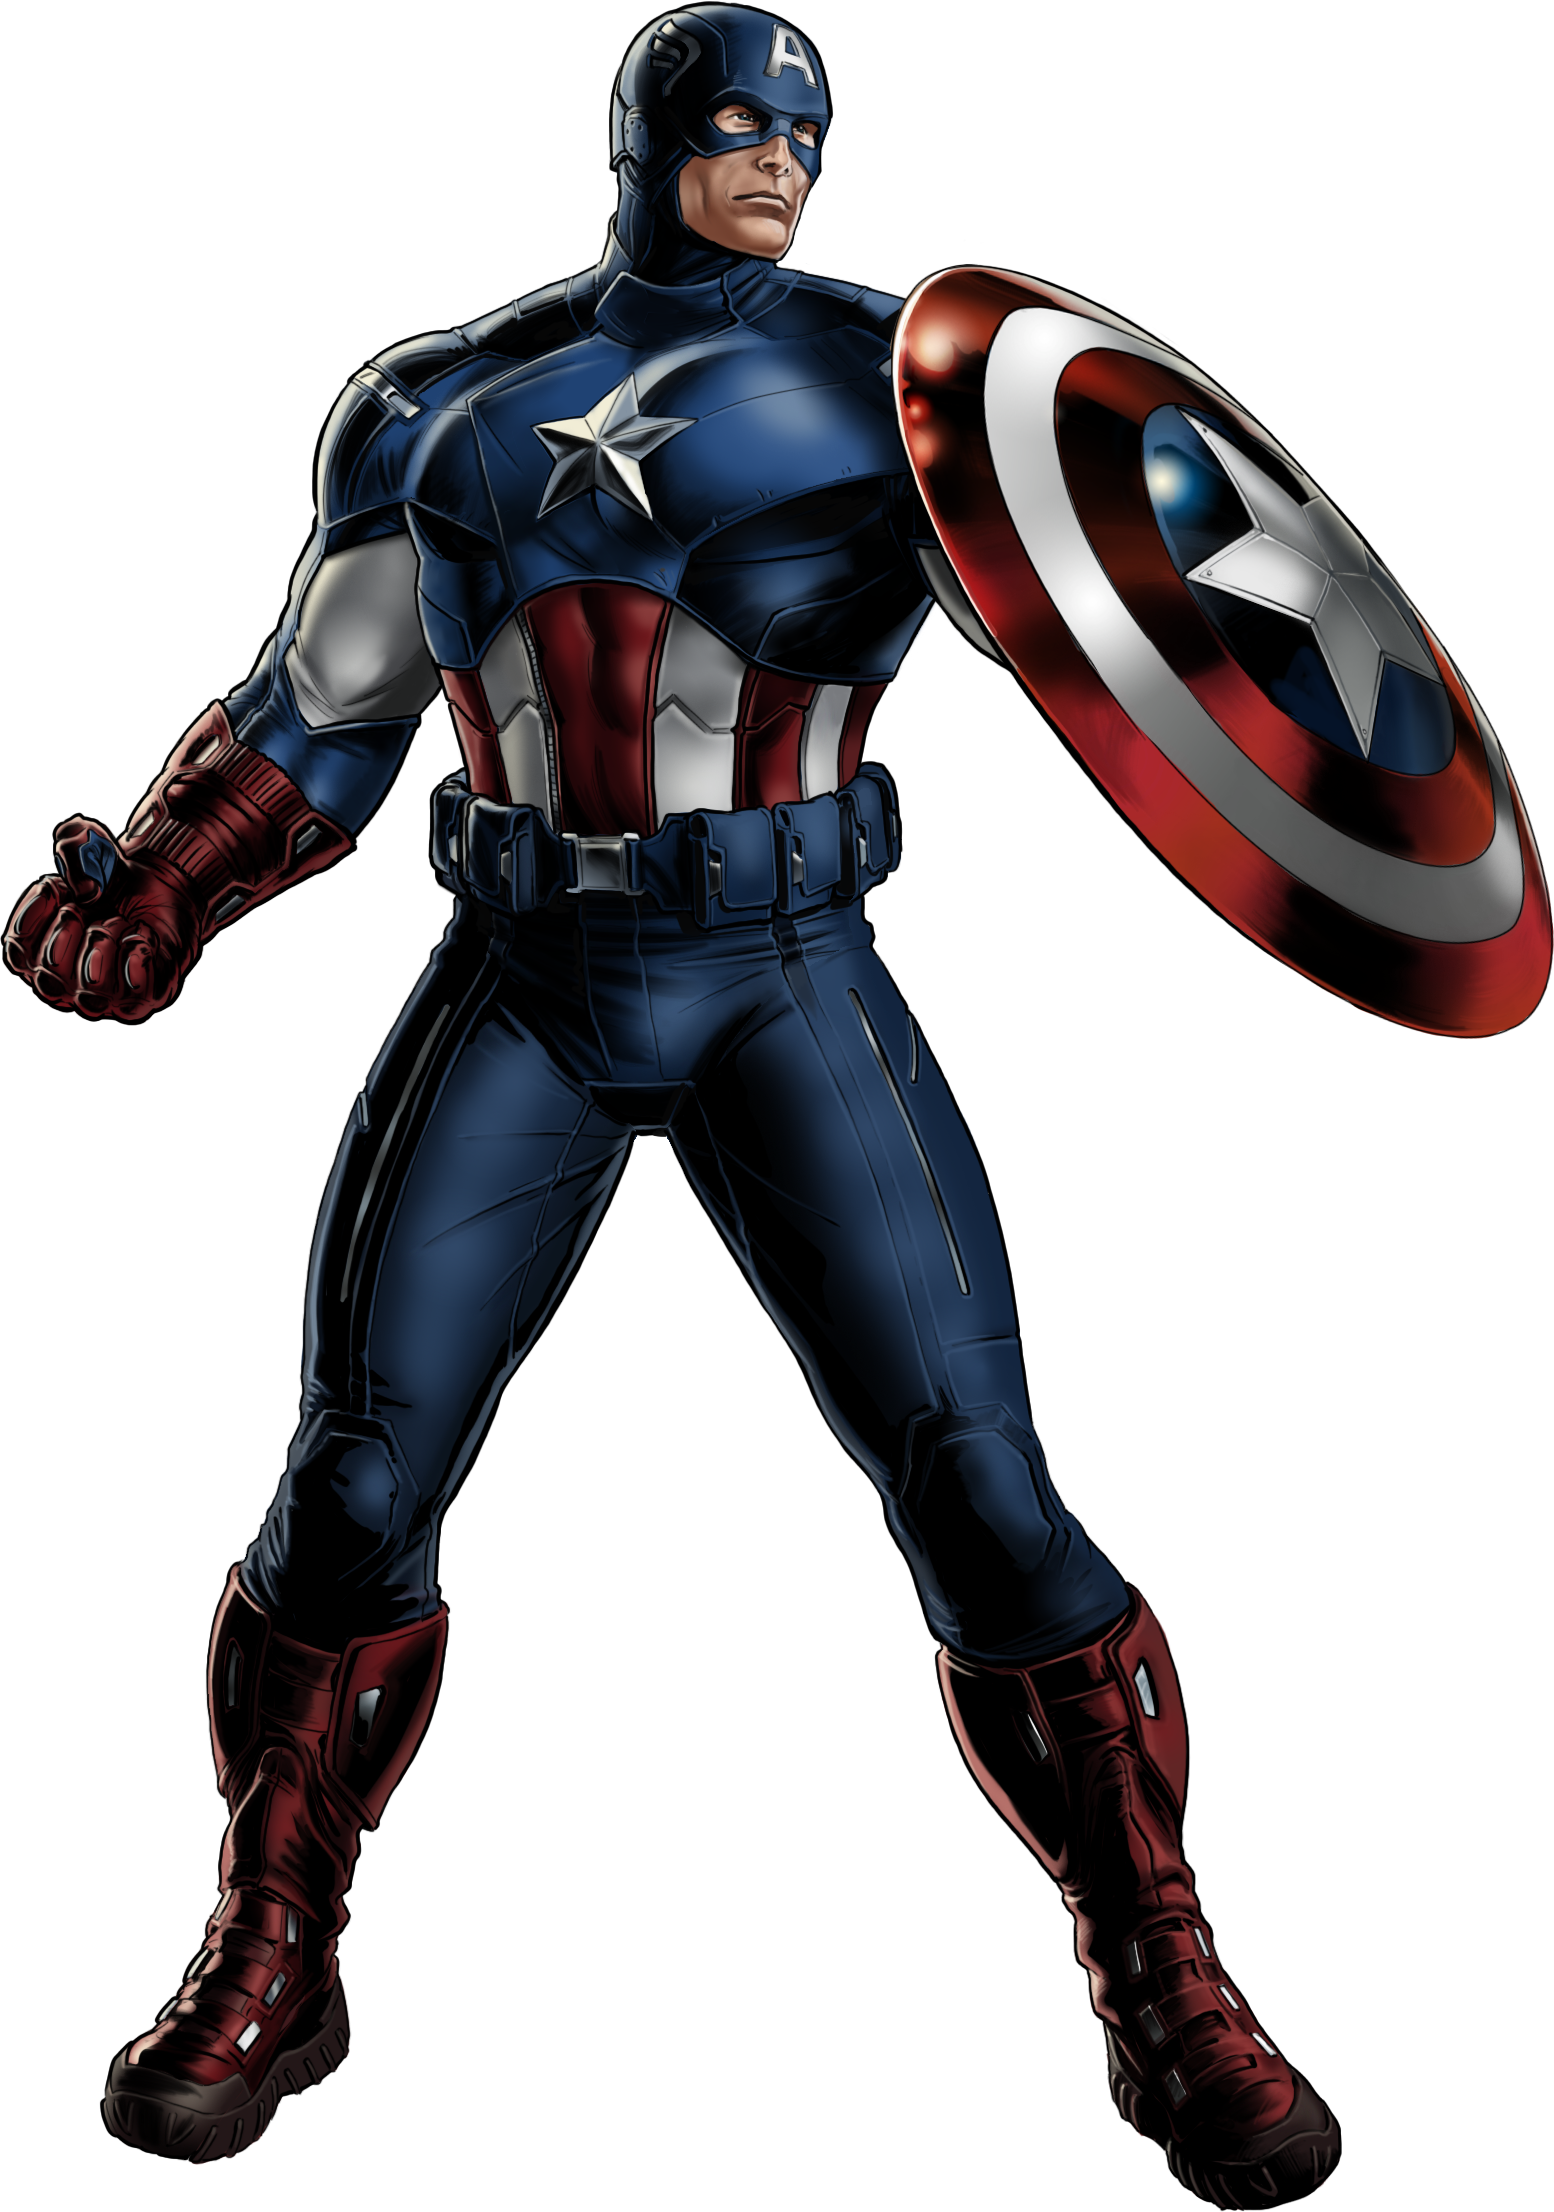 Avengers Hd Png Transparent Avengers Hdpng Images Pluspng